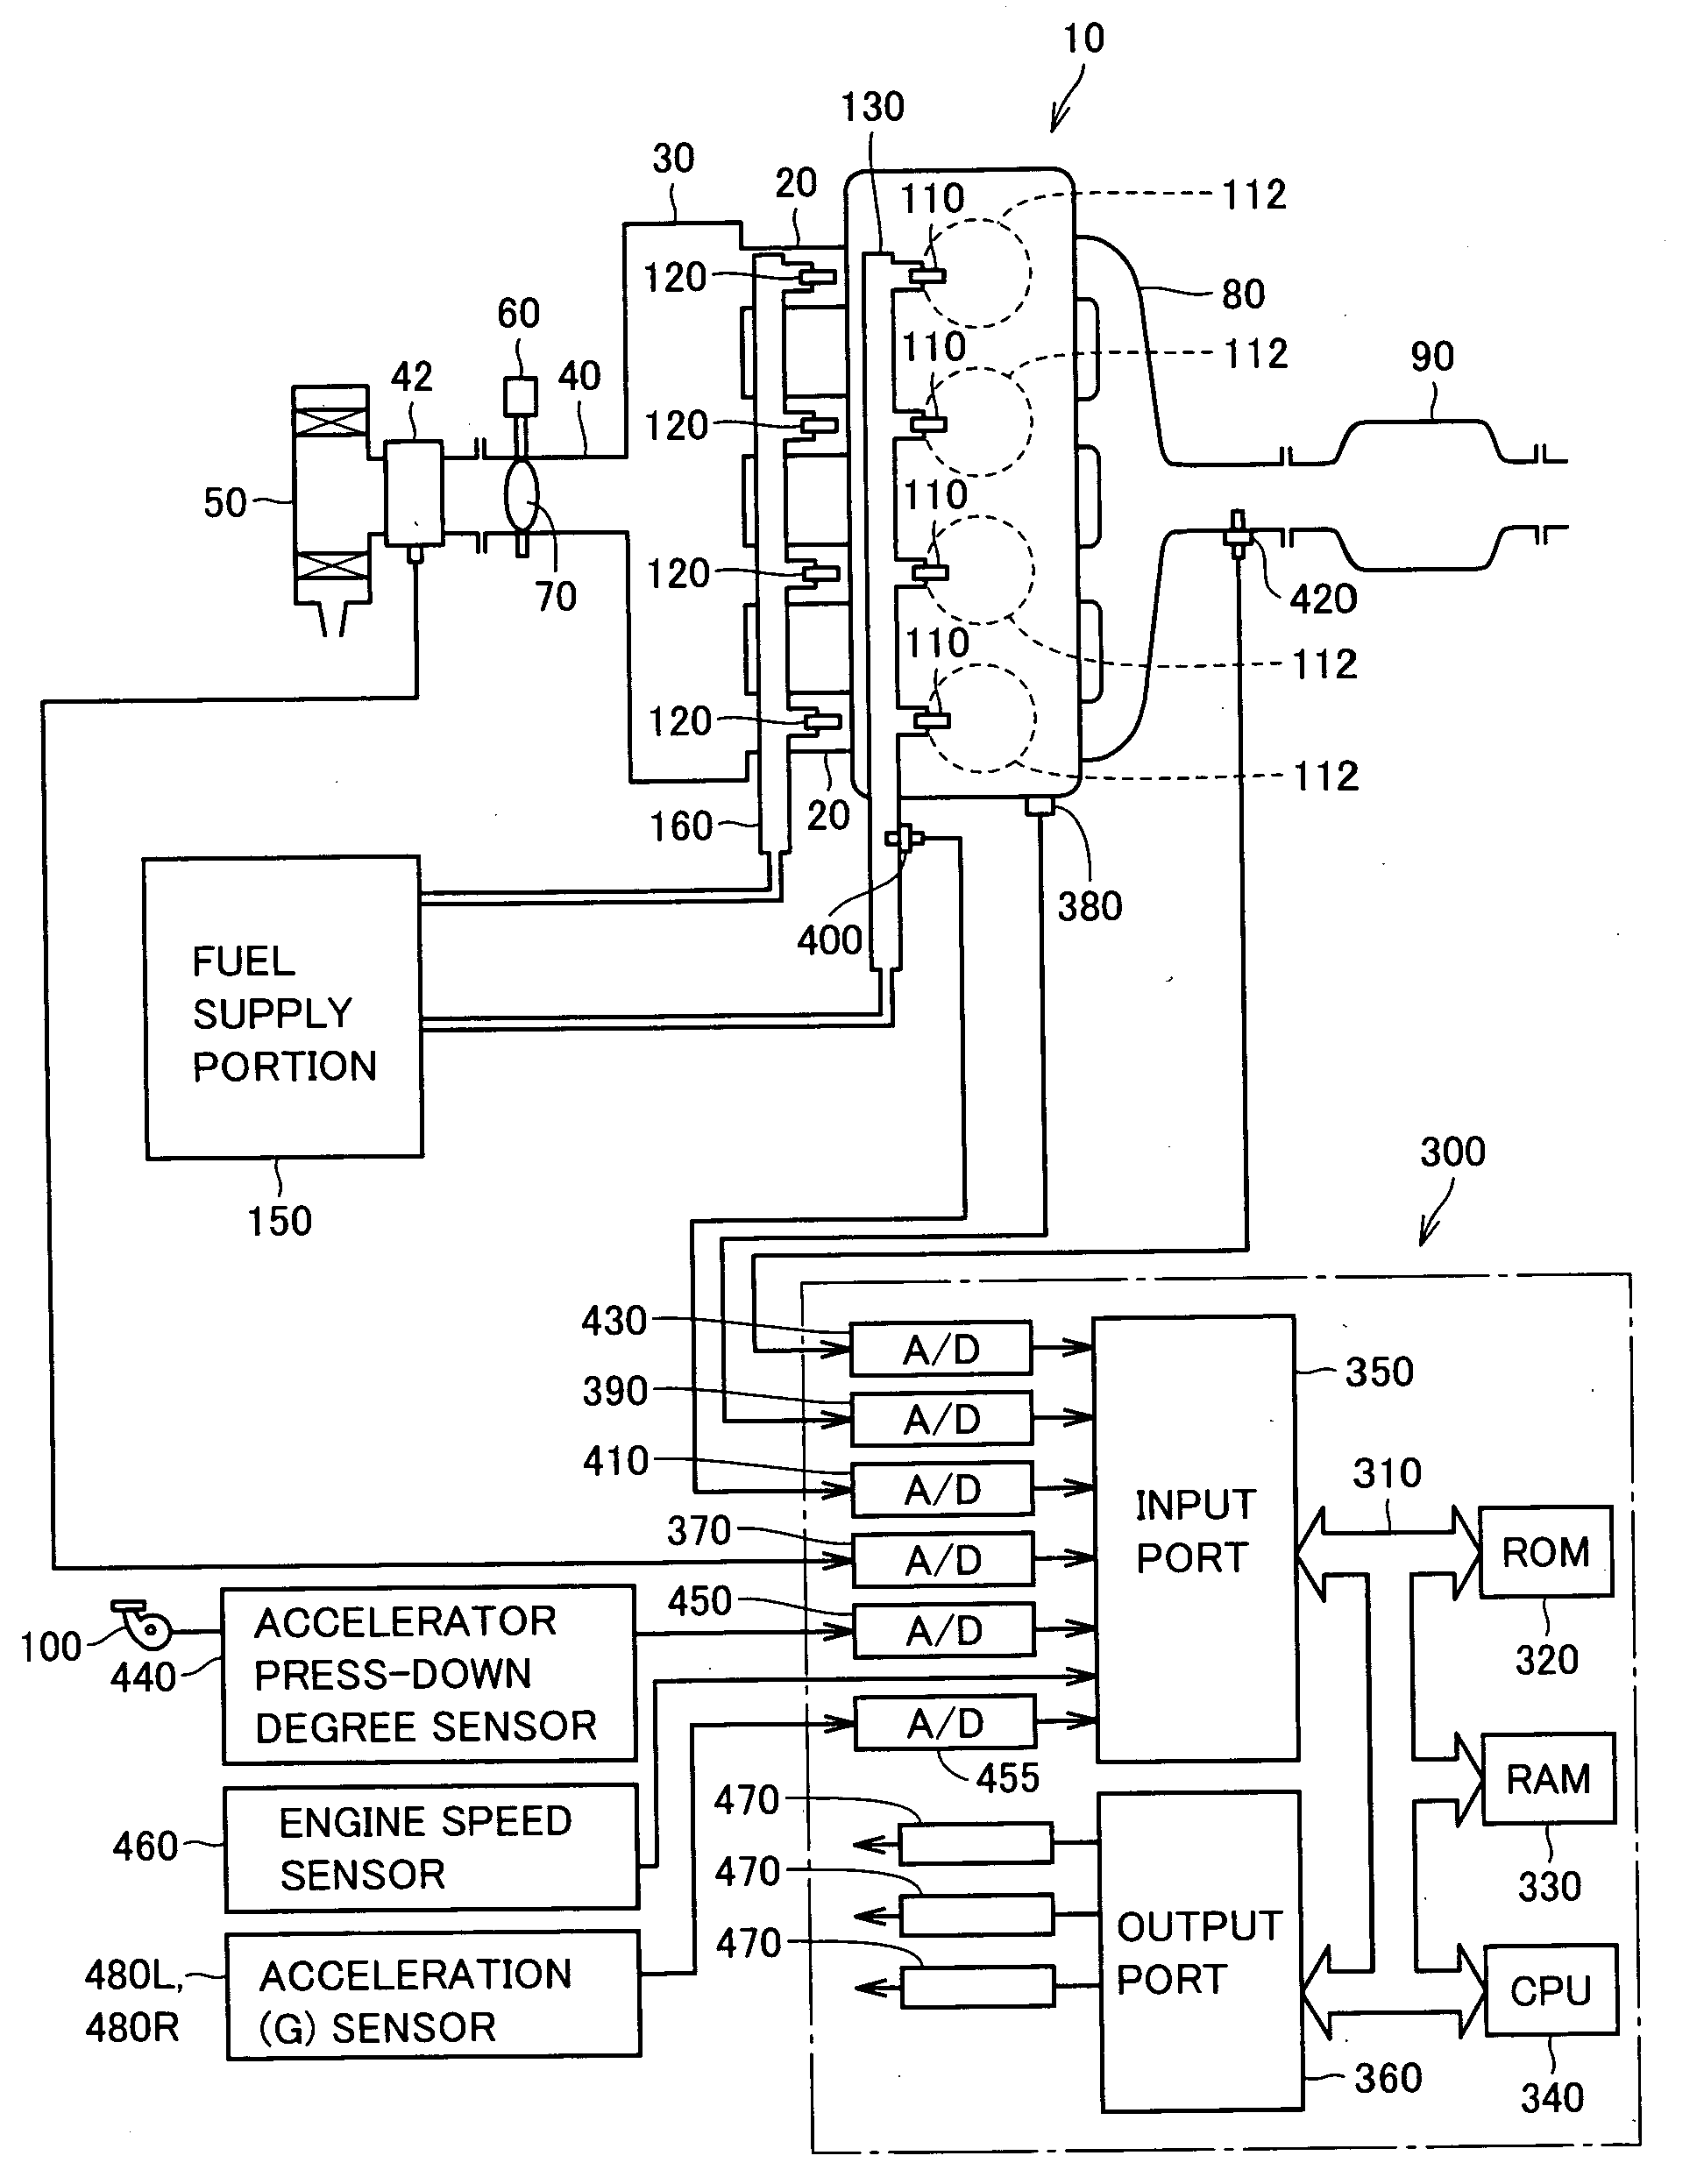 Fuel supply apparatus for vehicle